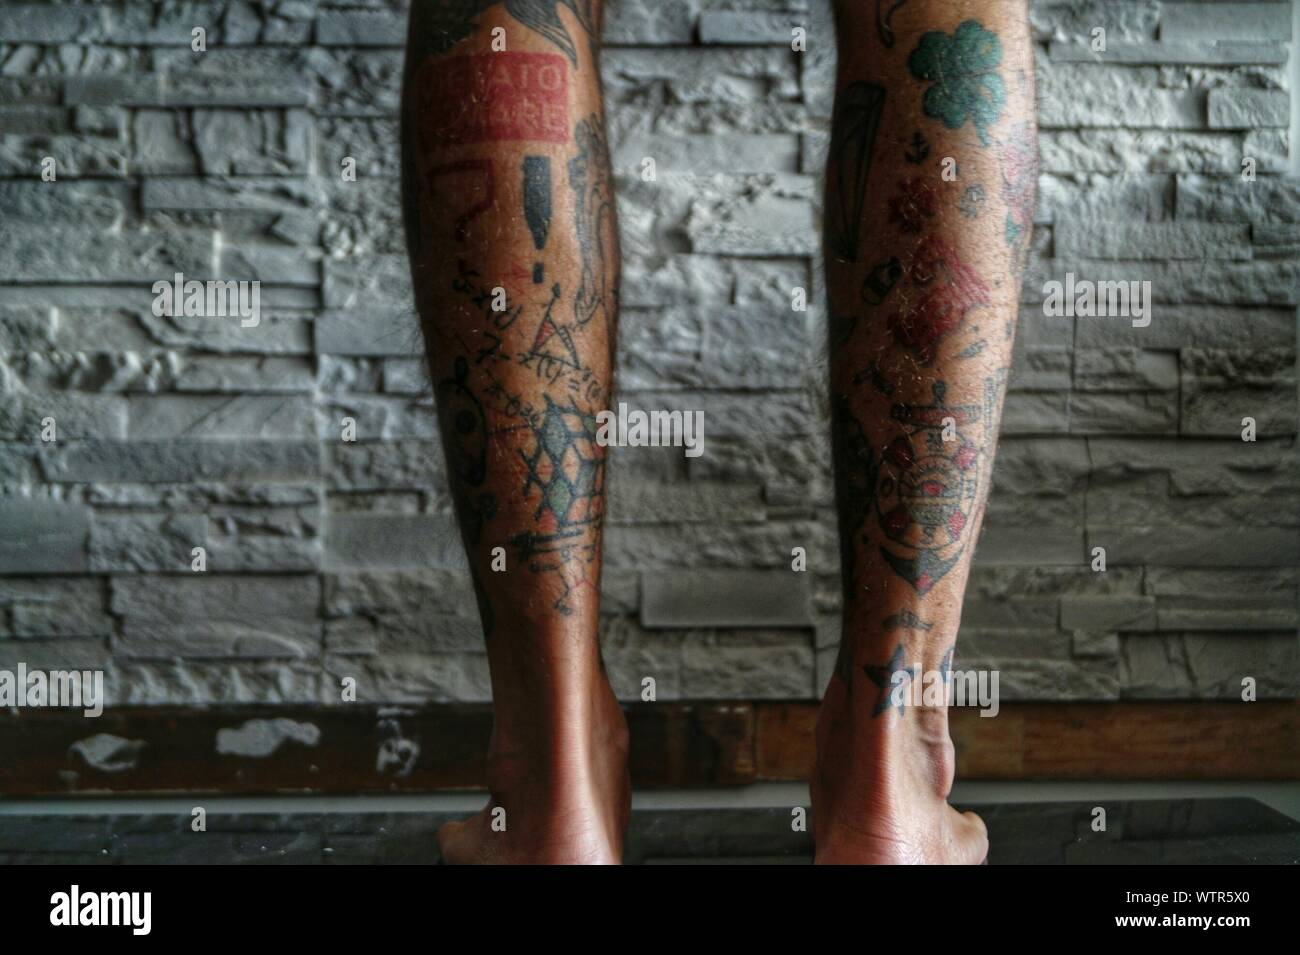 Low Section Of Man With Tattoo Against Brick Wall Stock Photo Alamy